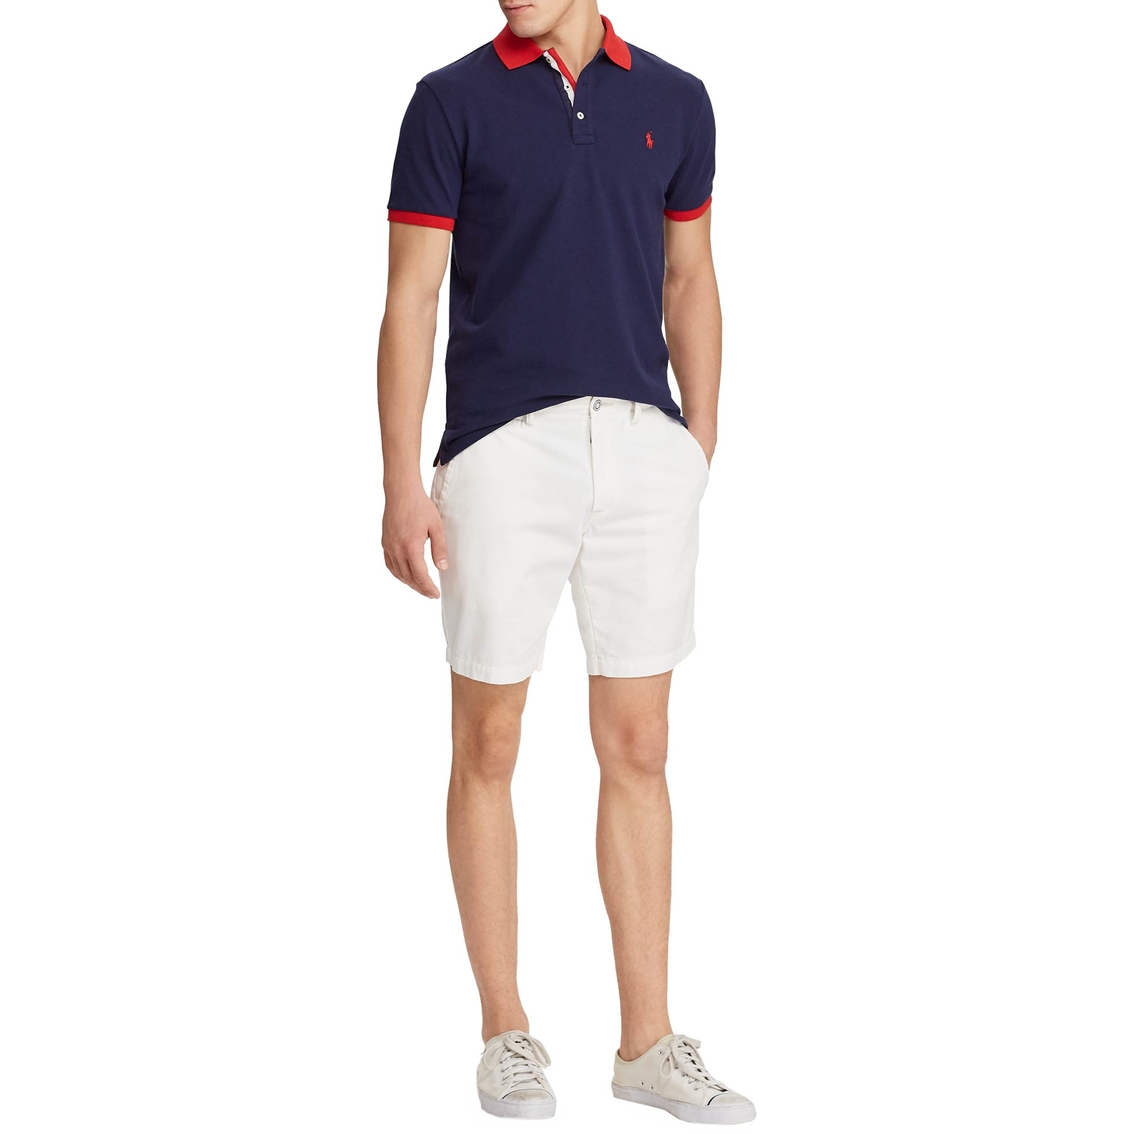 Polo Ralph Lauren Classic Fit Mesh Polo Shirt - Image 3 of 4